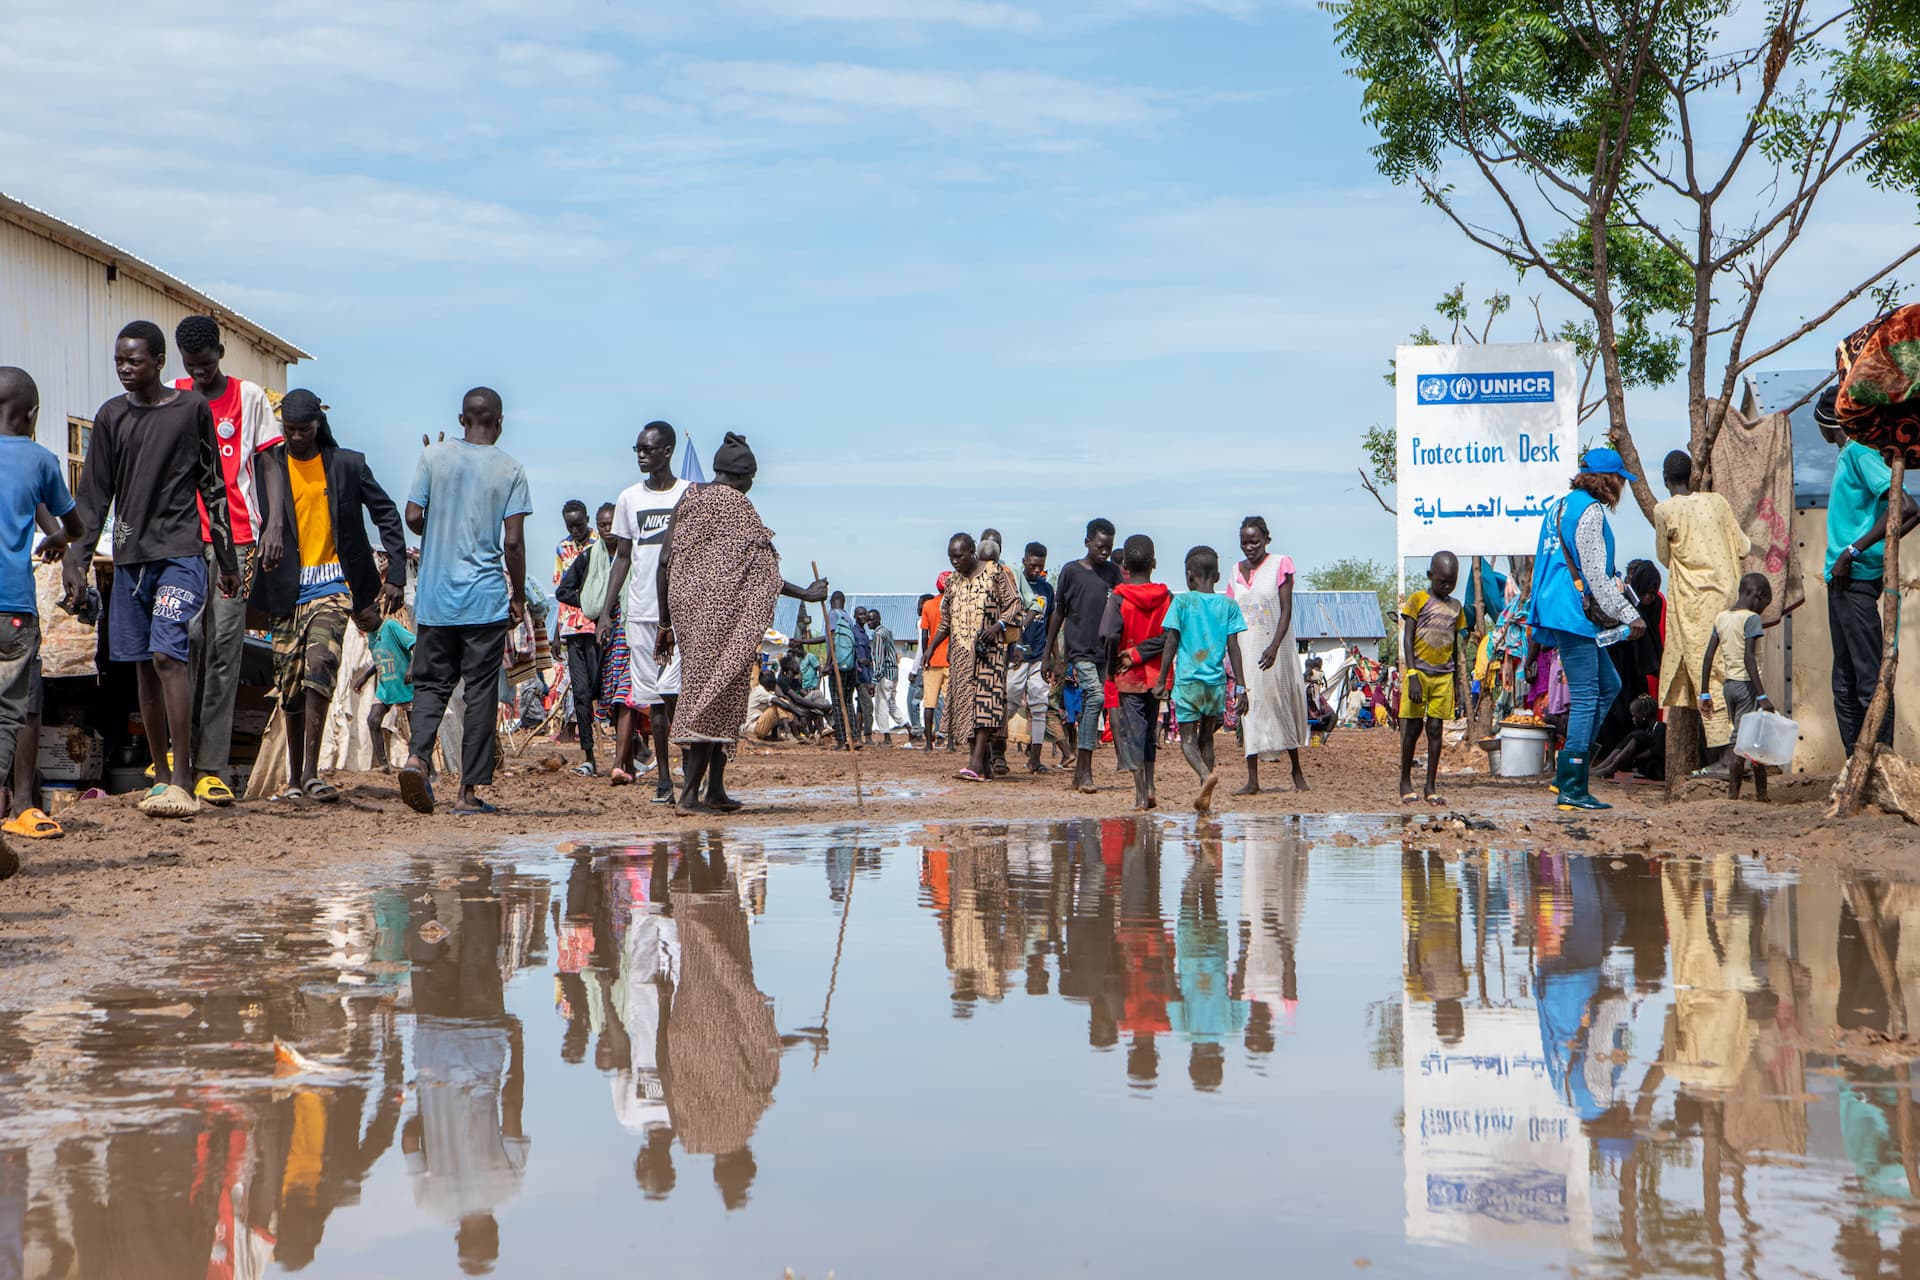 Heavy rains flood UNHCR's transit centre in Renk in South Sudan's Upper Nile State. The centre is hosting thousands of people who have fled the conflict in Sudan, the majority of them returning South Sudanese.